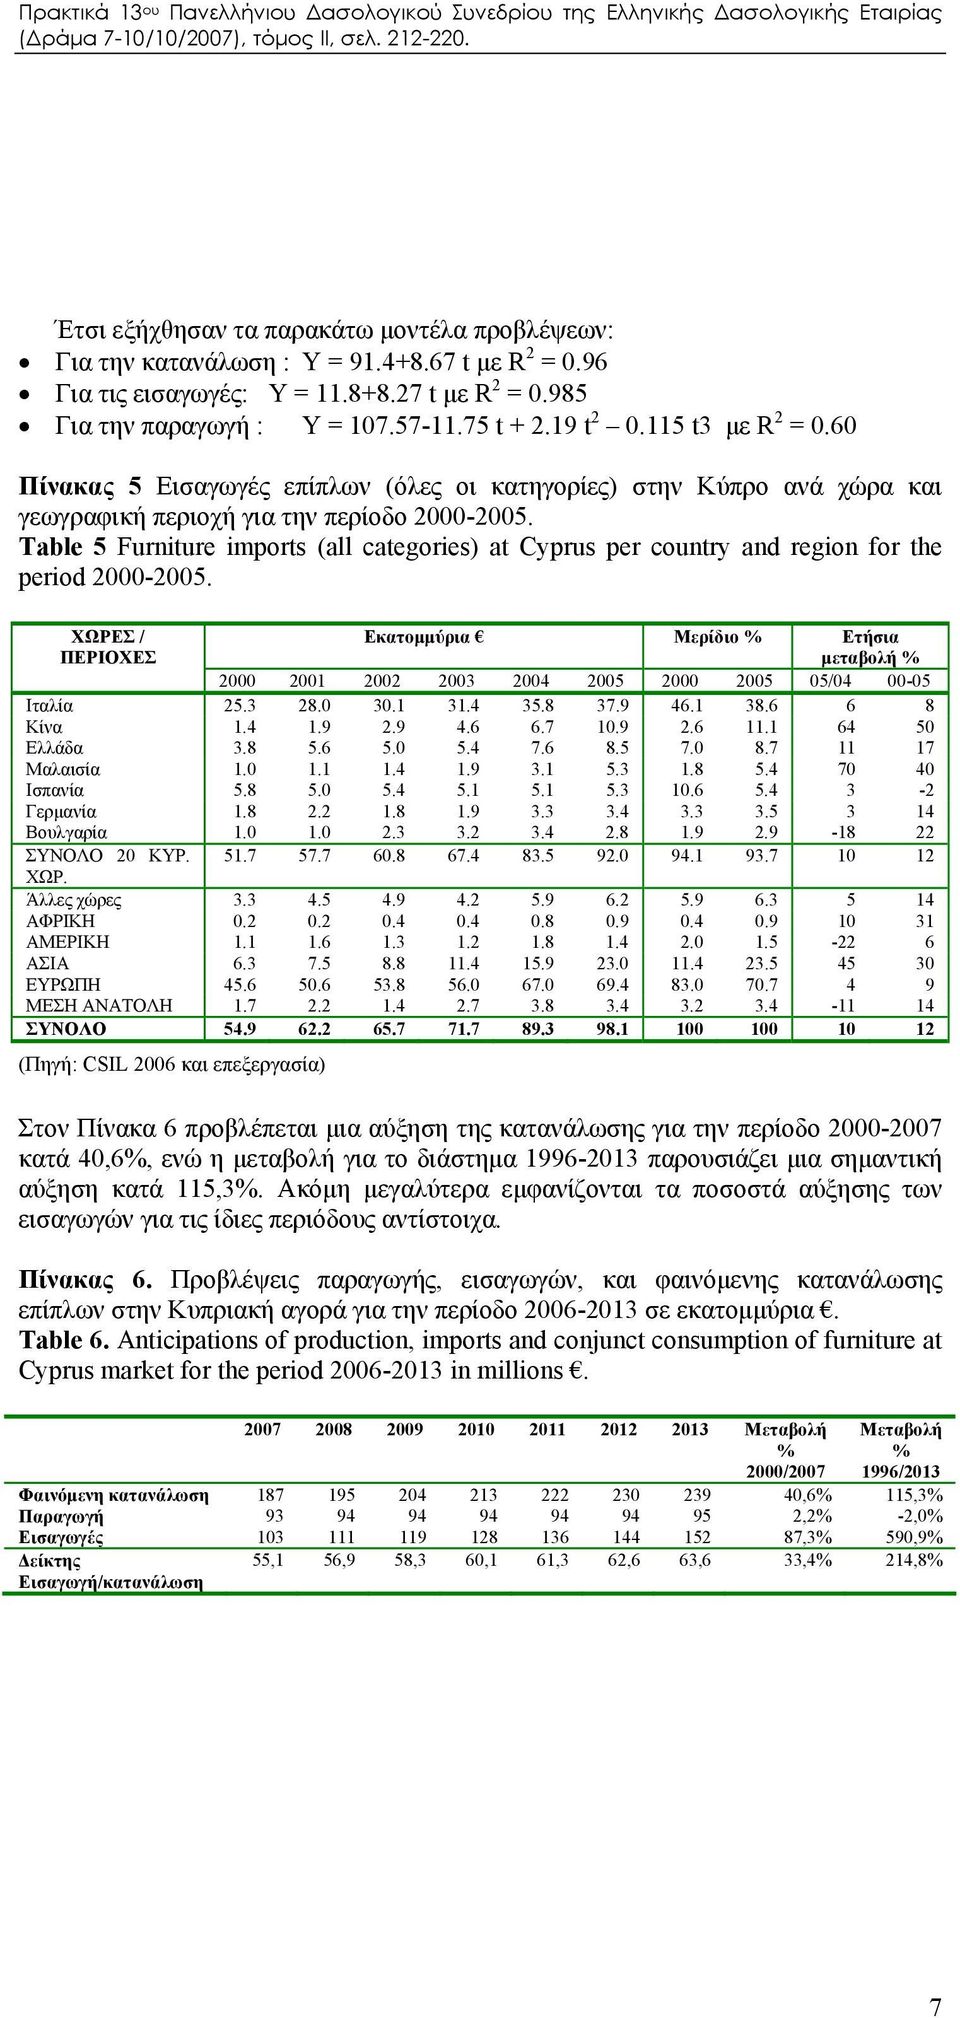 Table 5 Furniture imports (all categories) at Cyprus per country and region for the period 2000-2005.